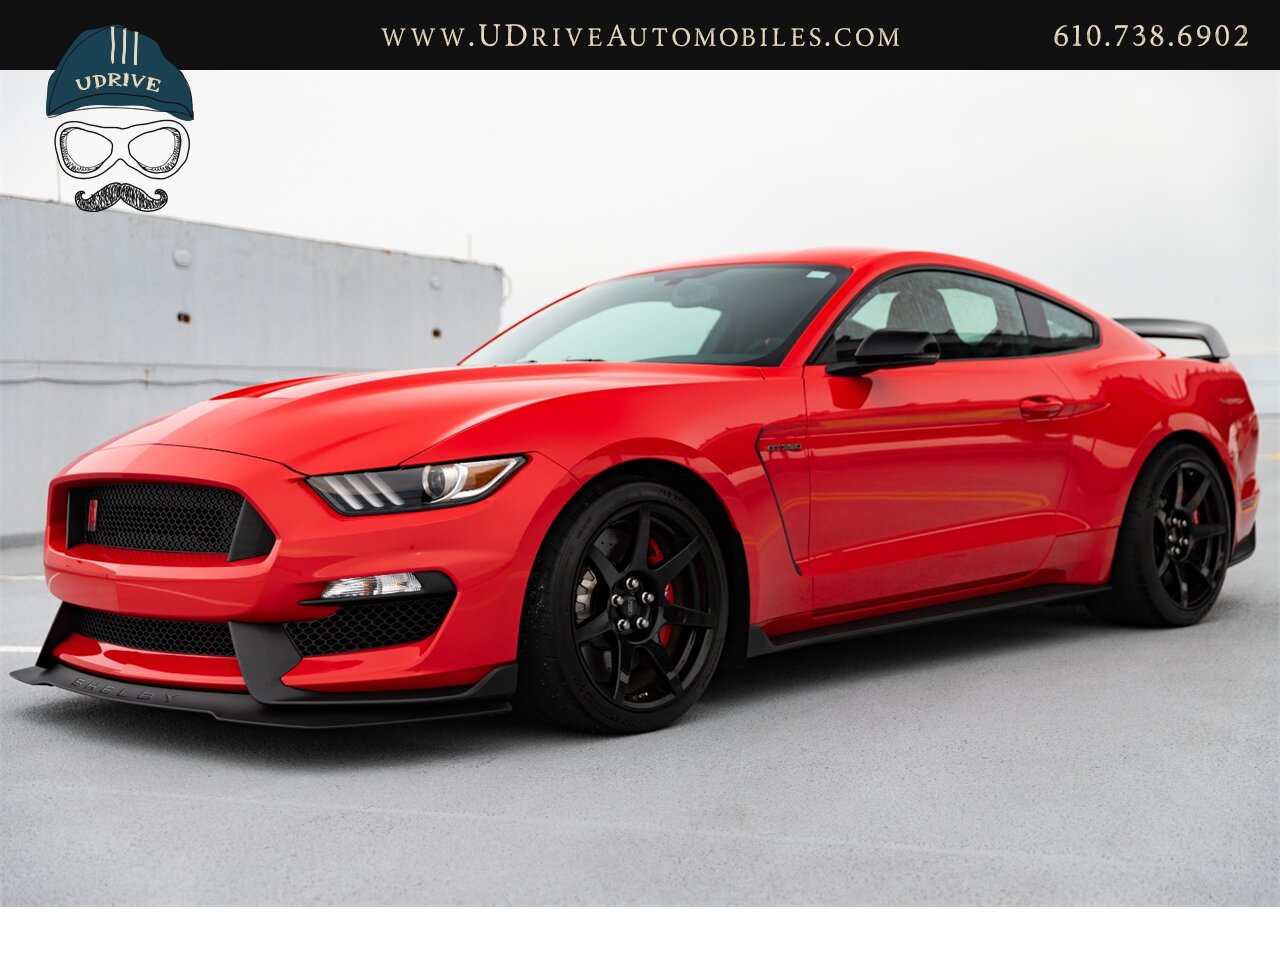 2016 Ford Mustang Shelby GT350R 3k Miles Electronics Pkg  1 of 32 Race Red Produced for USA As New - Photo 9 - West Chester, PA 19382